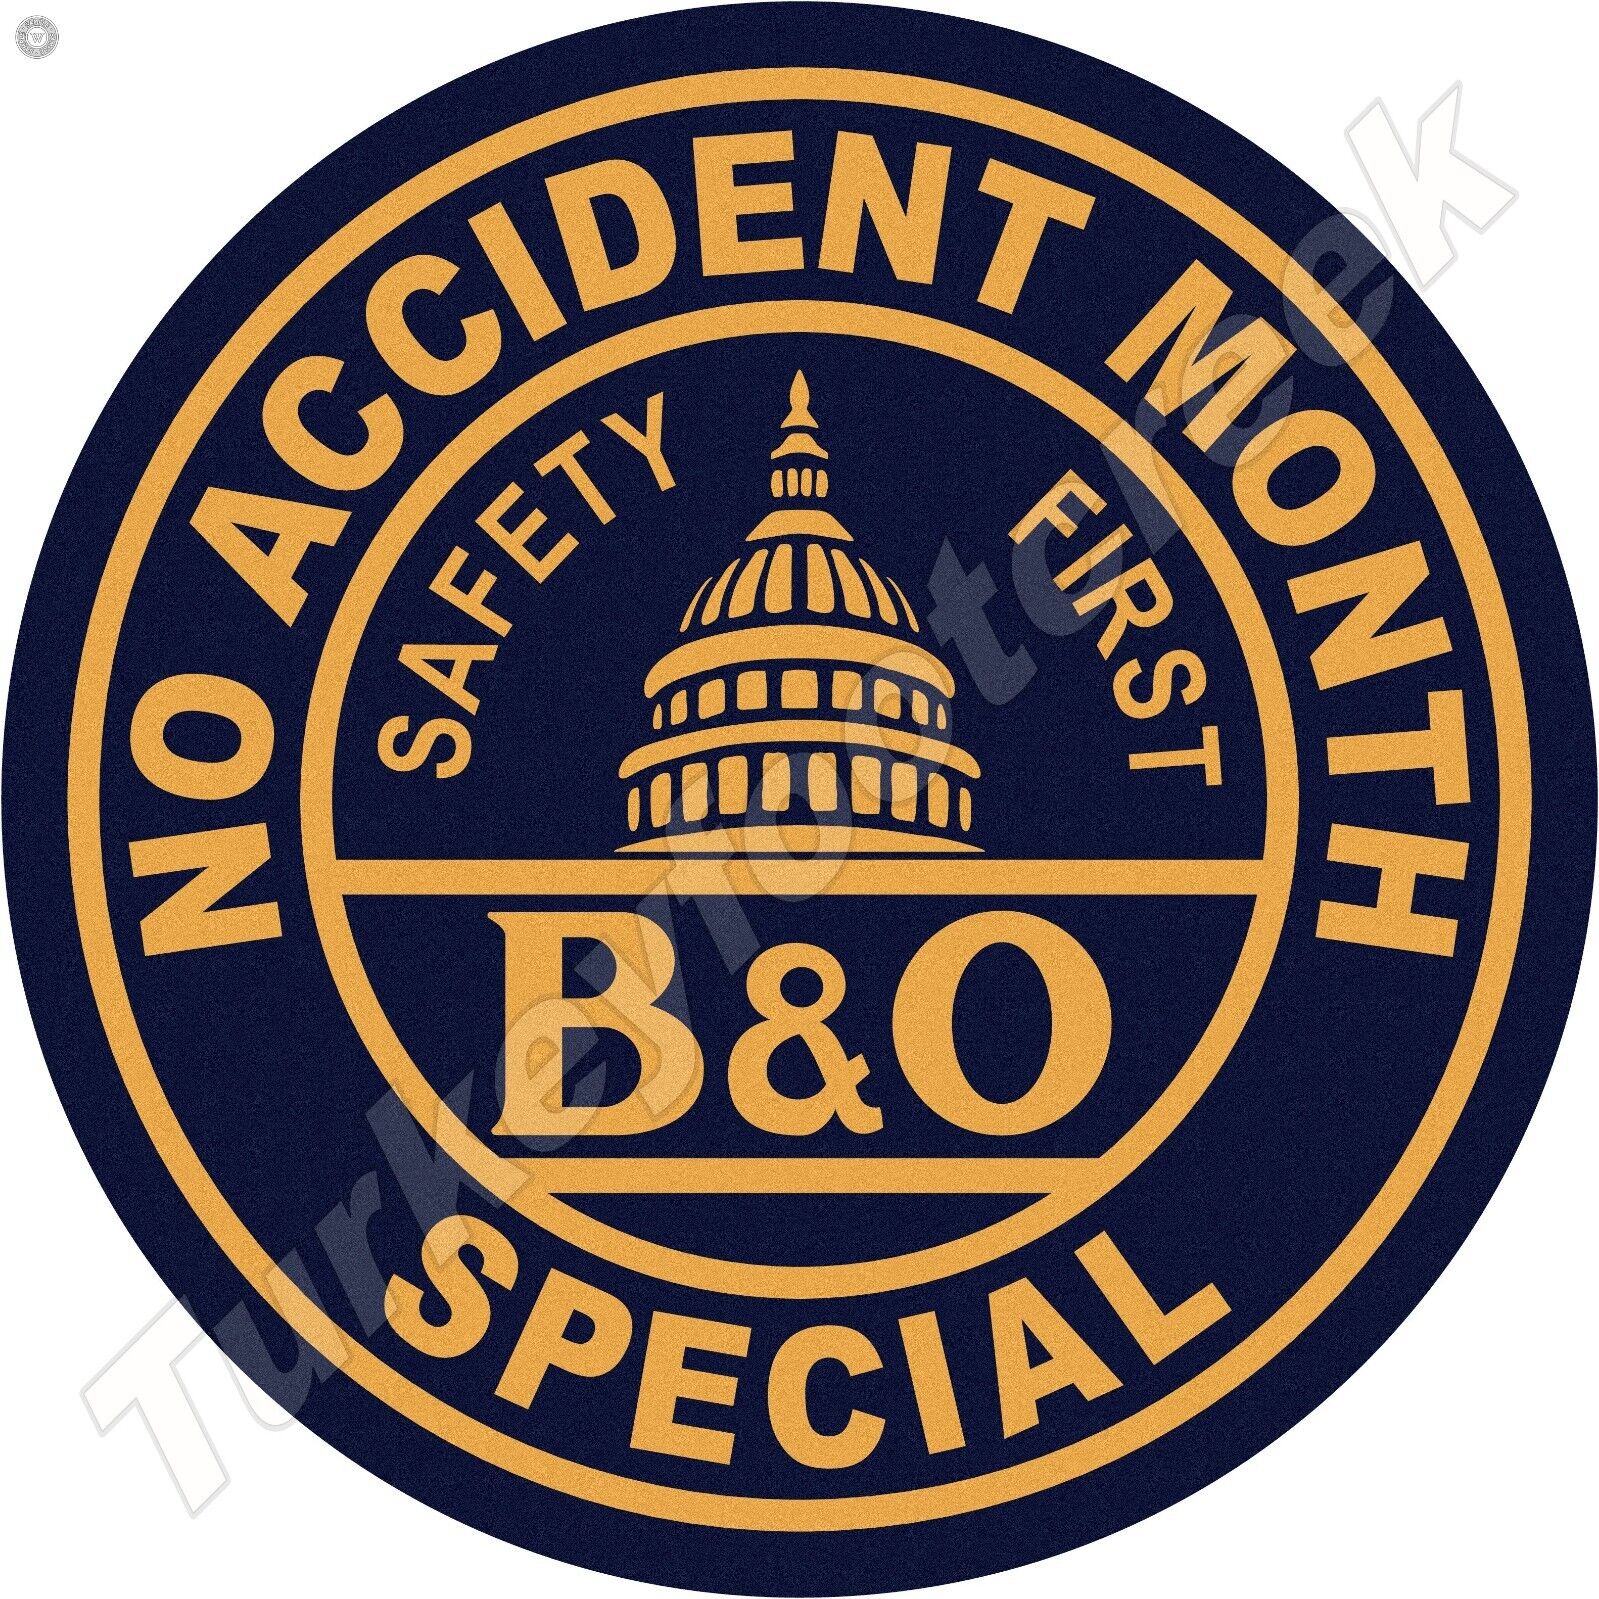 B&O Railroad No Accident Month Special 11.75